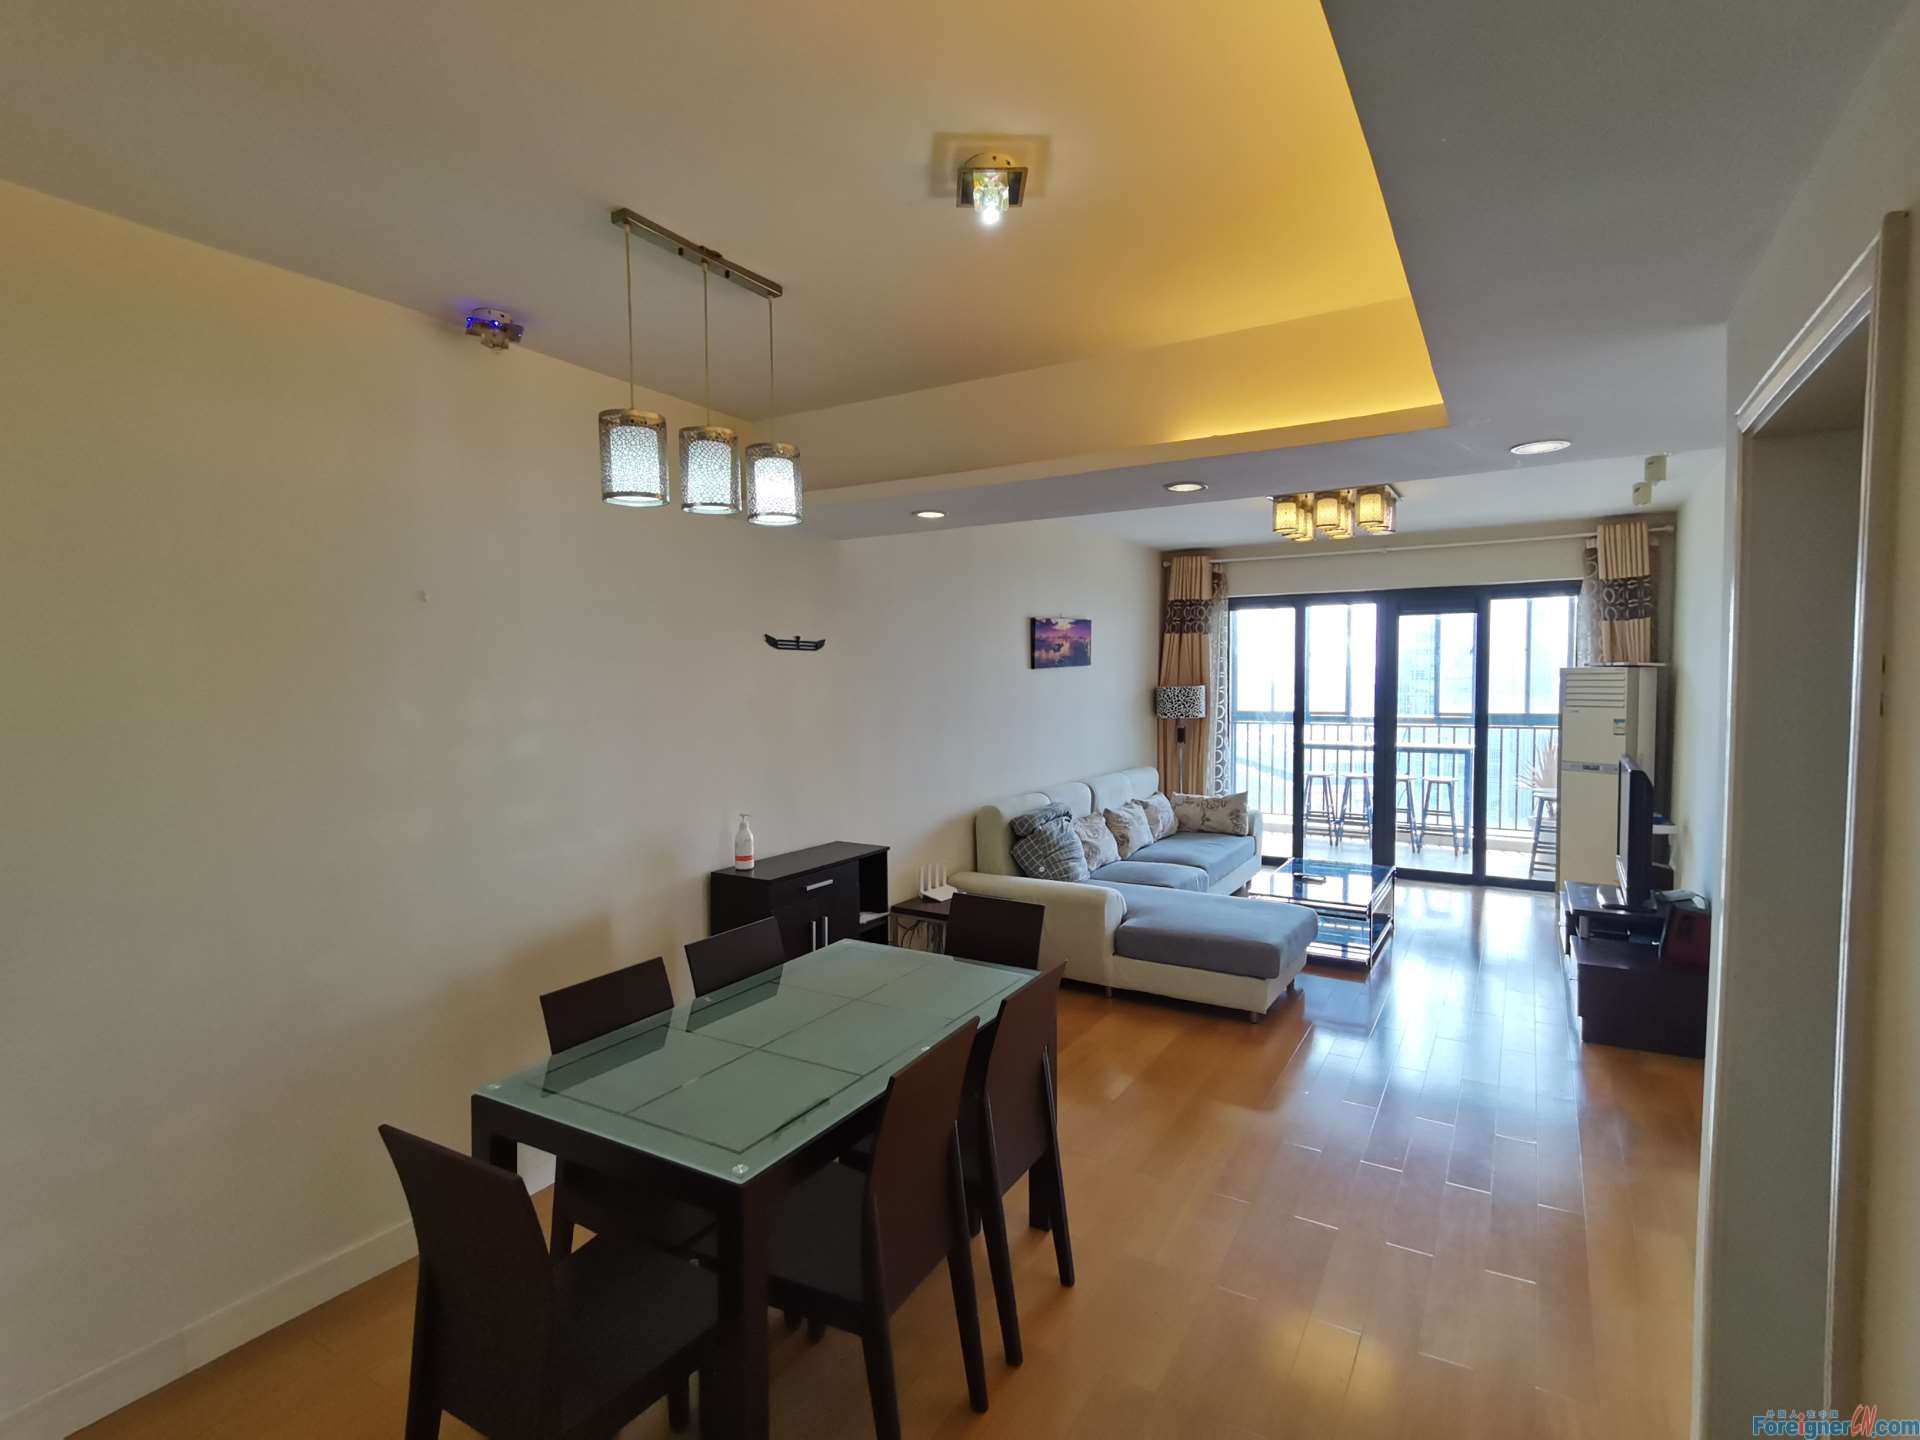 Stunning！！！Galaxy Centro apartment rent inSuzhou/2 bedrooms and 1 bathroom/great Balcony /Fully-furnished/Times Square/Subway Station line1/